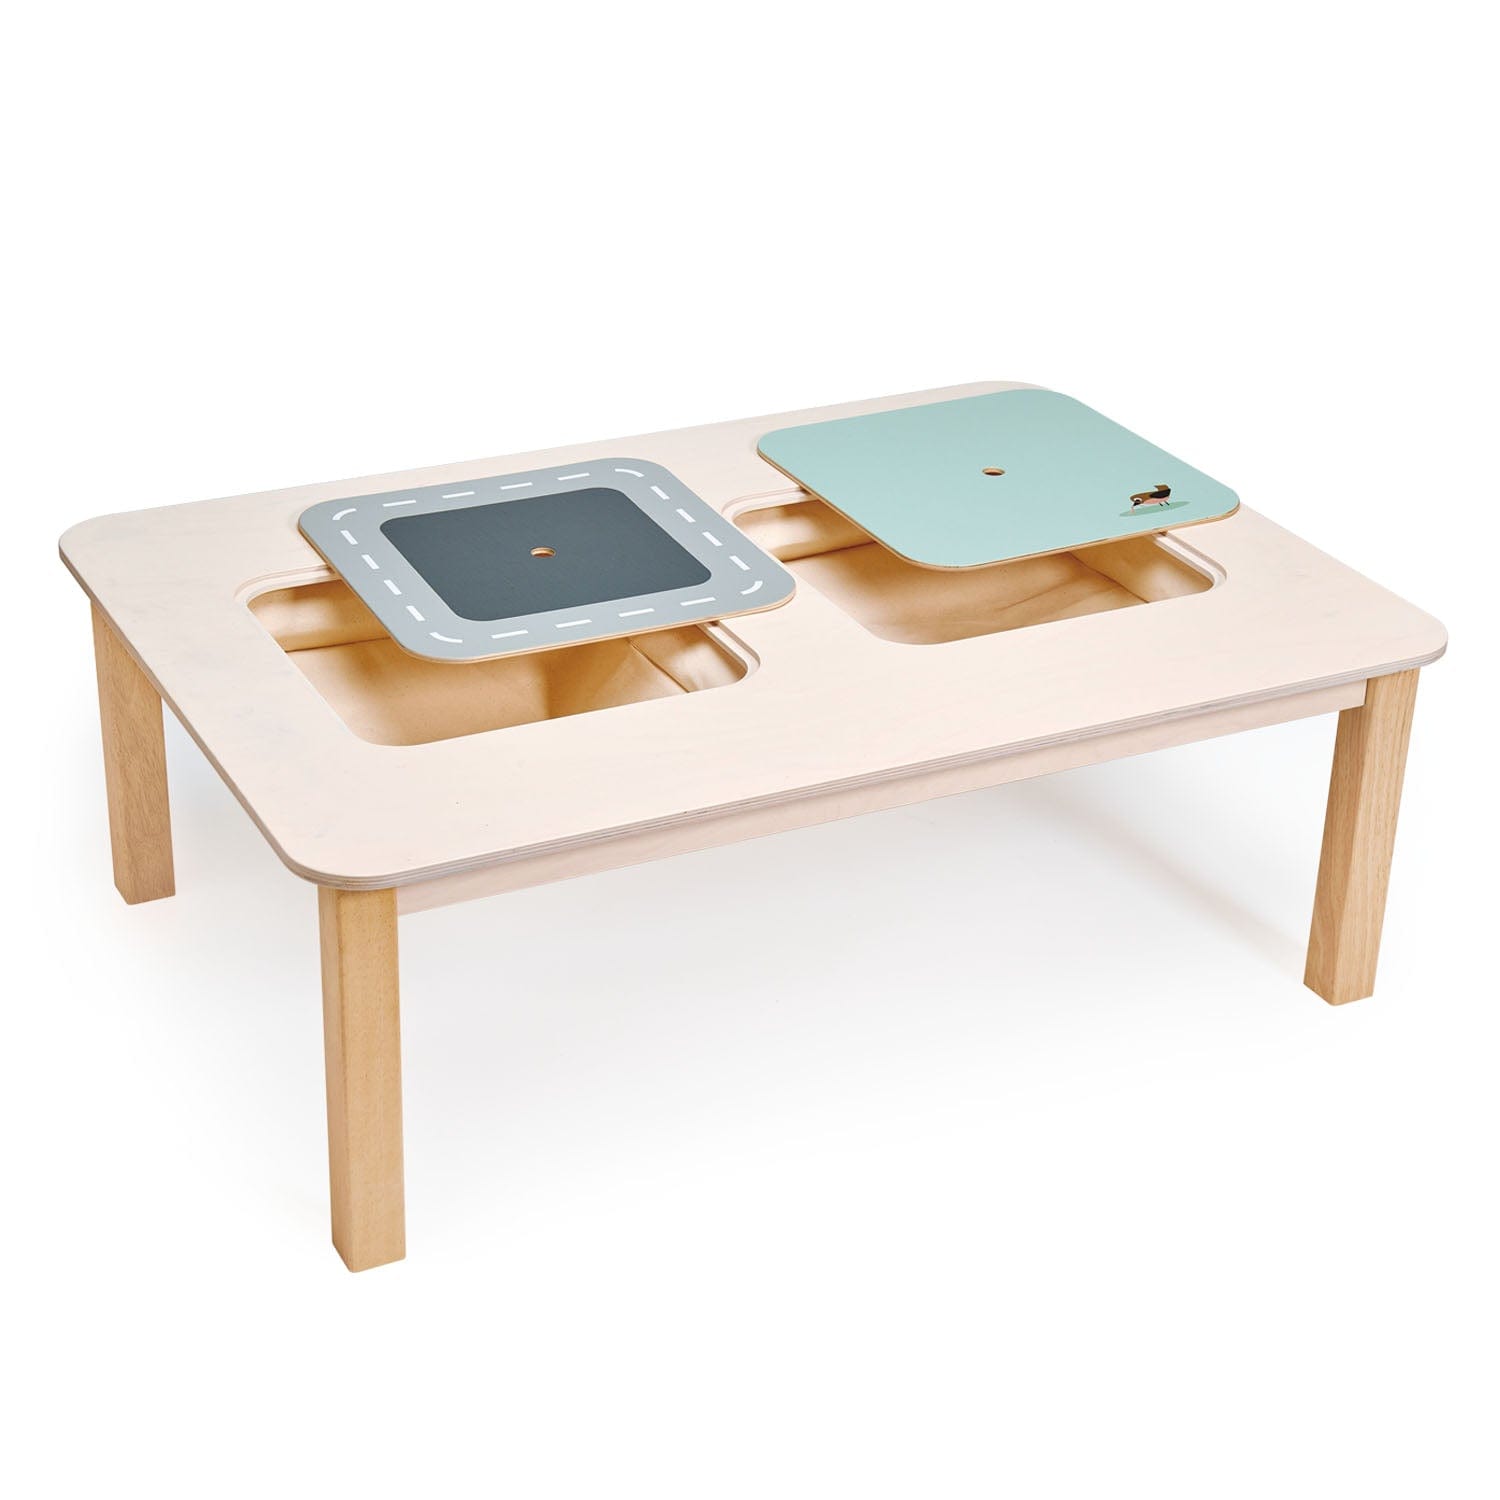 Tender Leaf Toys wooden furniture Play Table